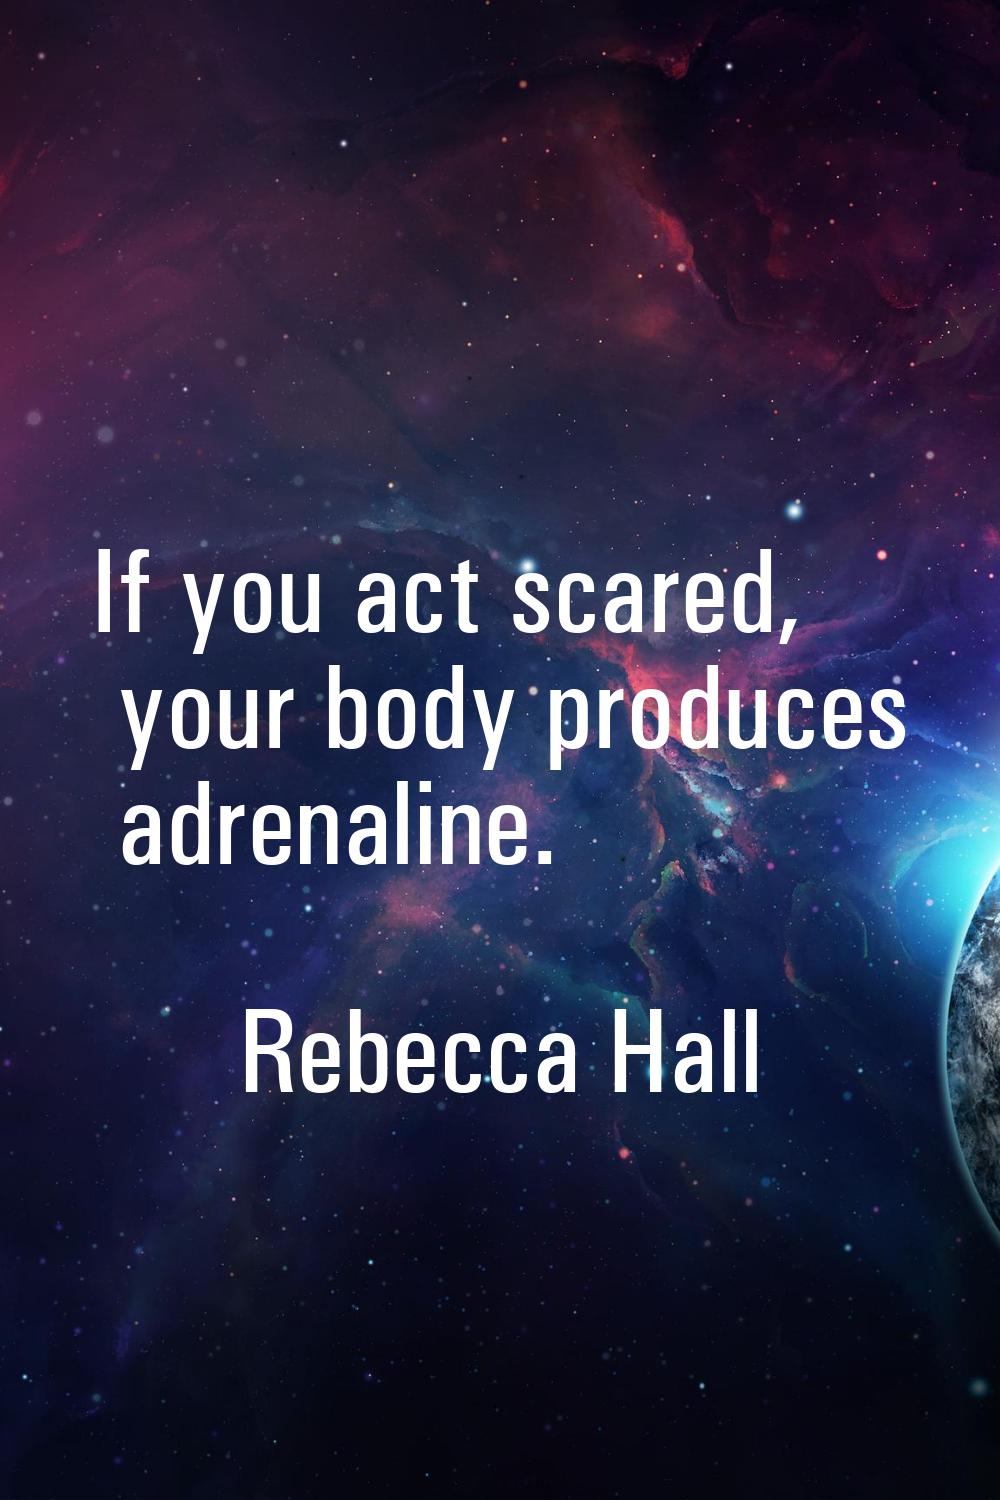 If you act scared, your body produces adrenaline.